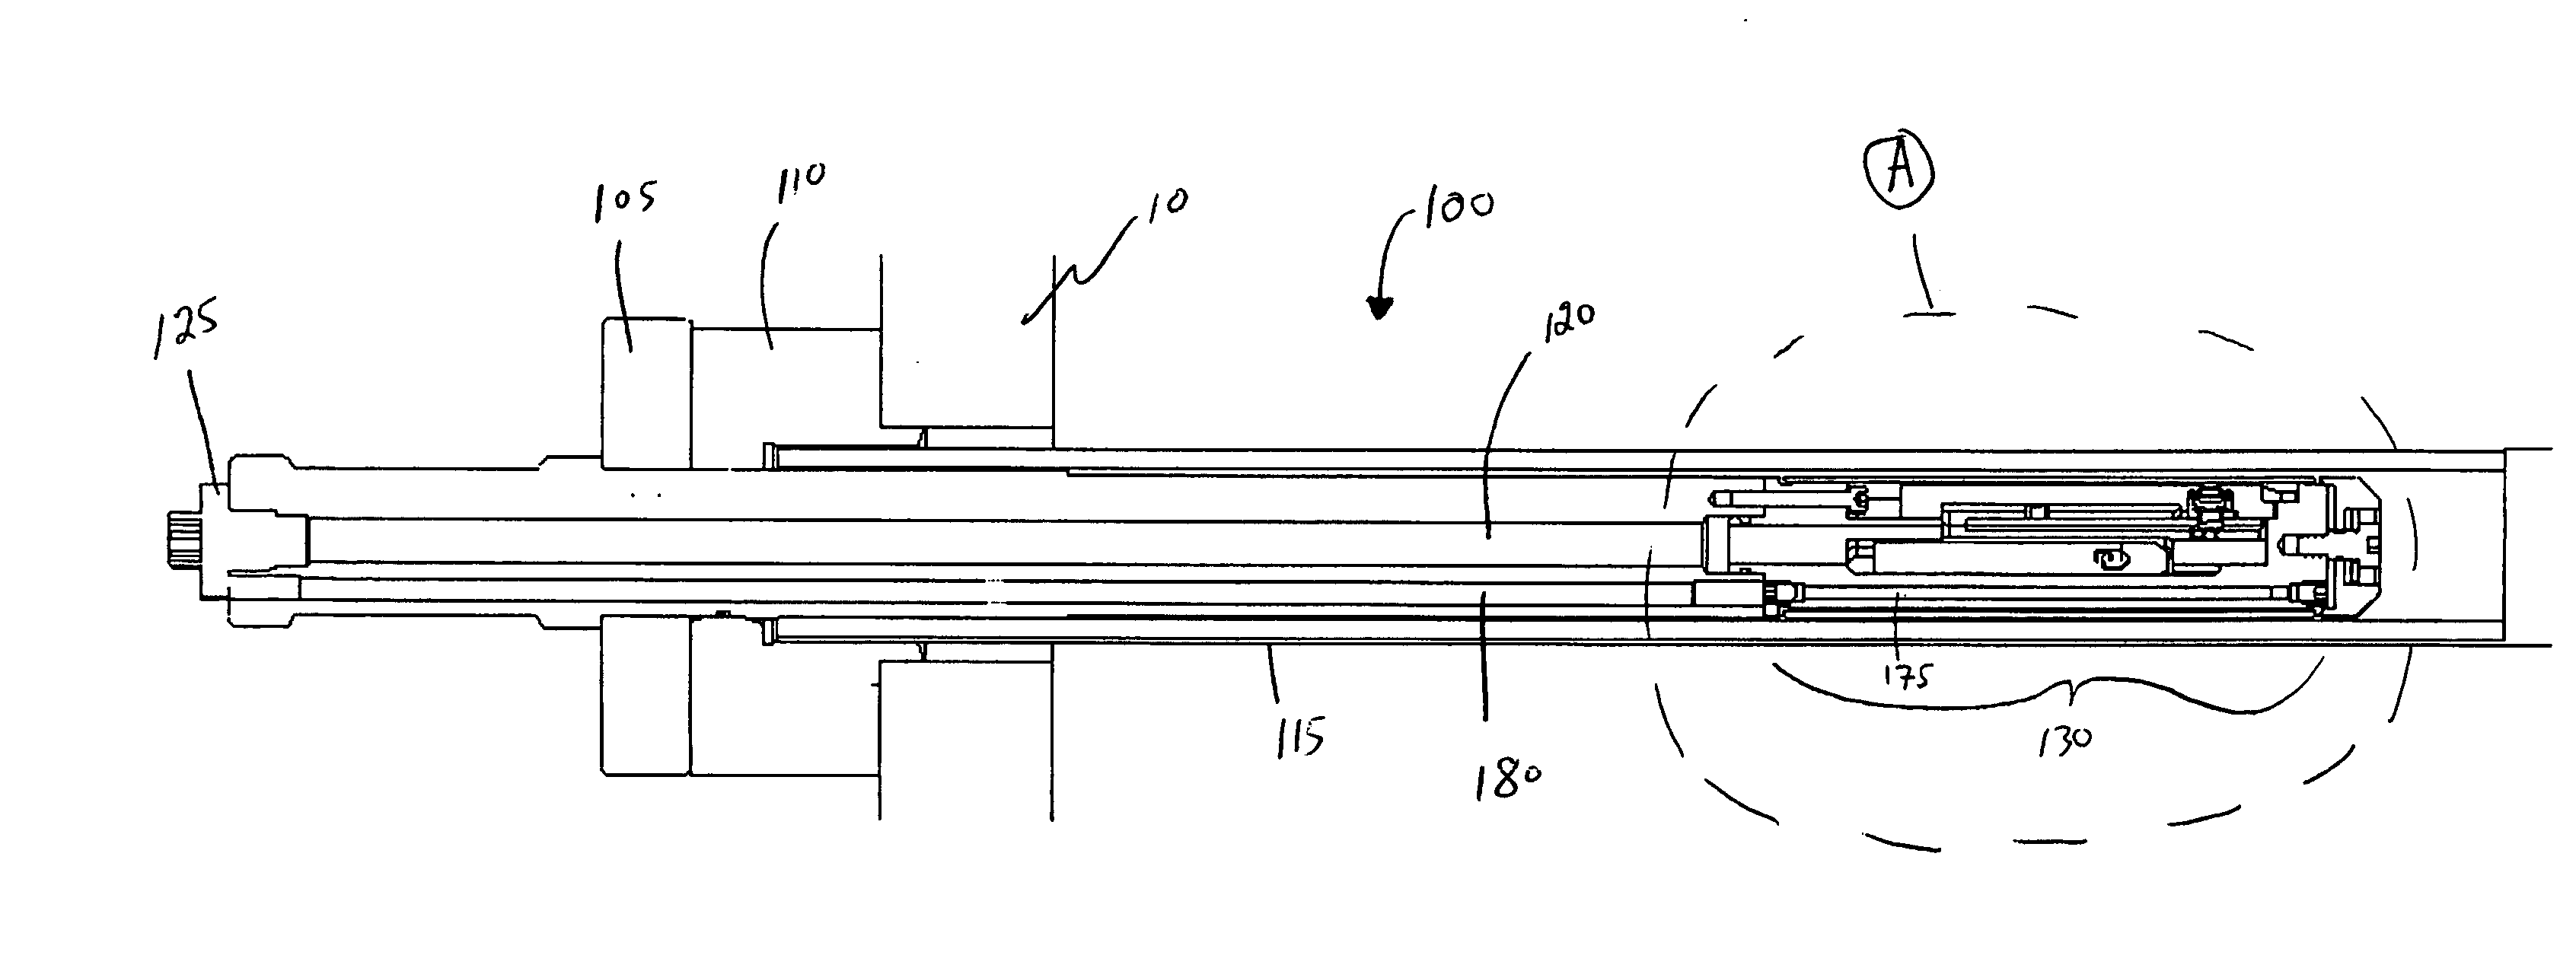 Radiation sensor device and fluid treatment system containing same